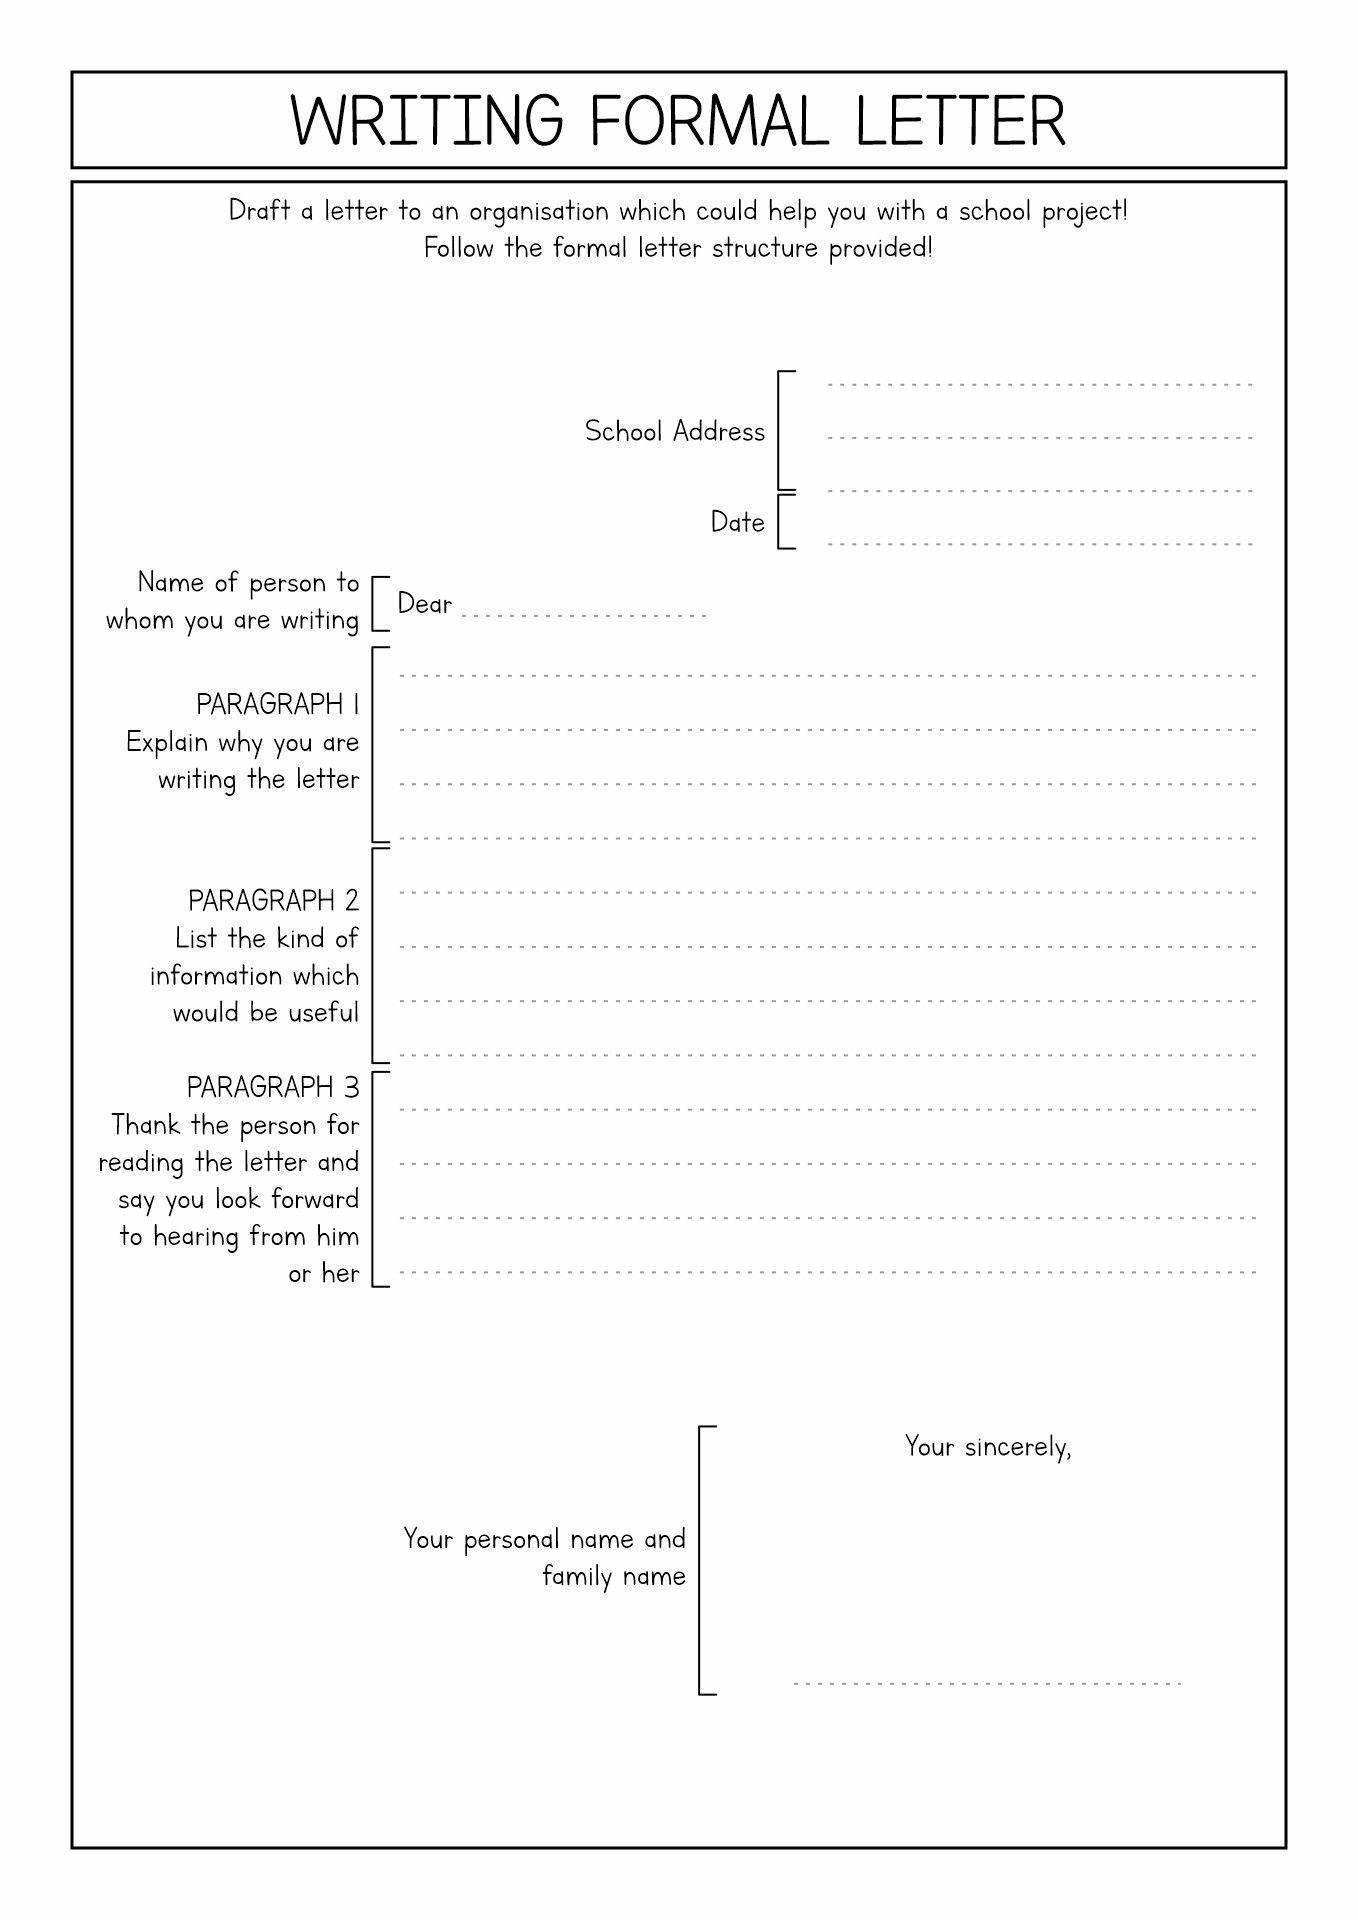 16-best-images-of-adult-free-printable-writing-worksheets-creative-writing-worksheets-for-kids